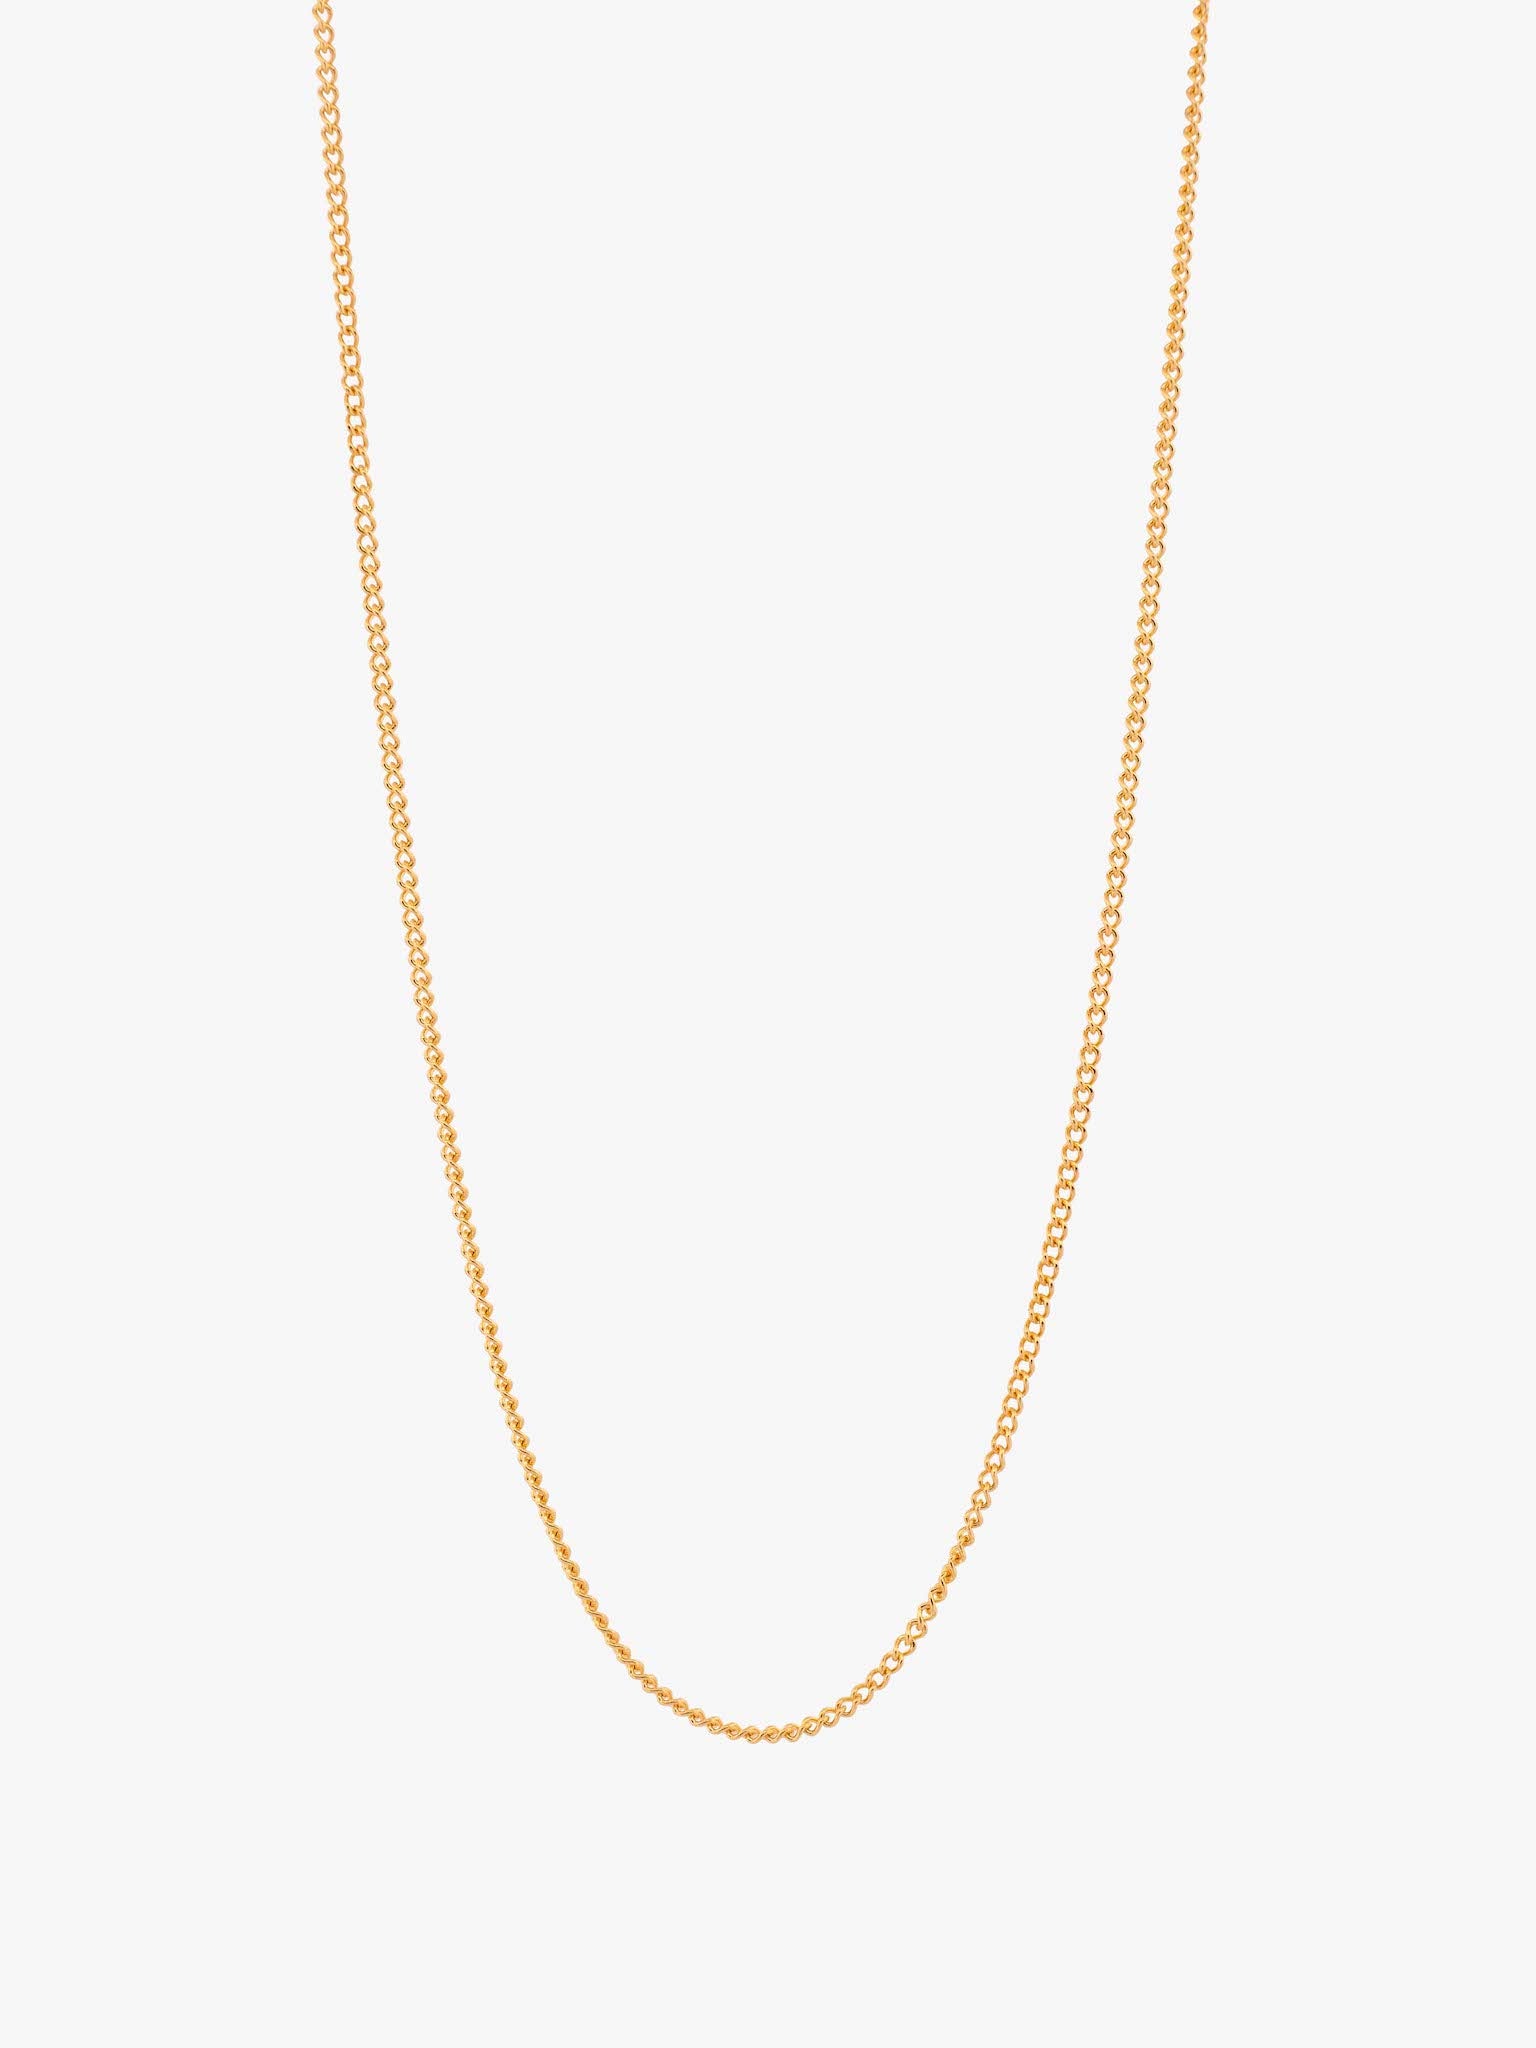 Baby chain necklace